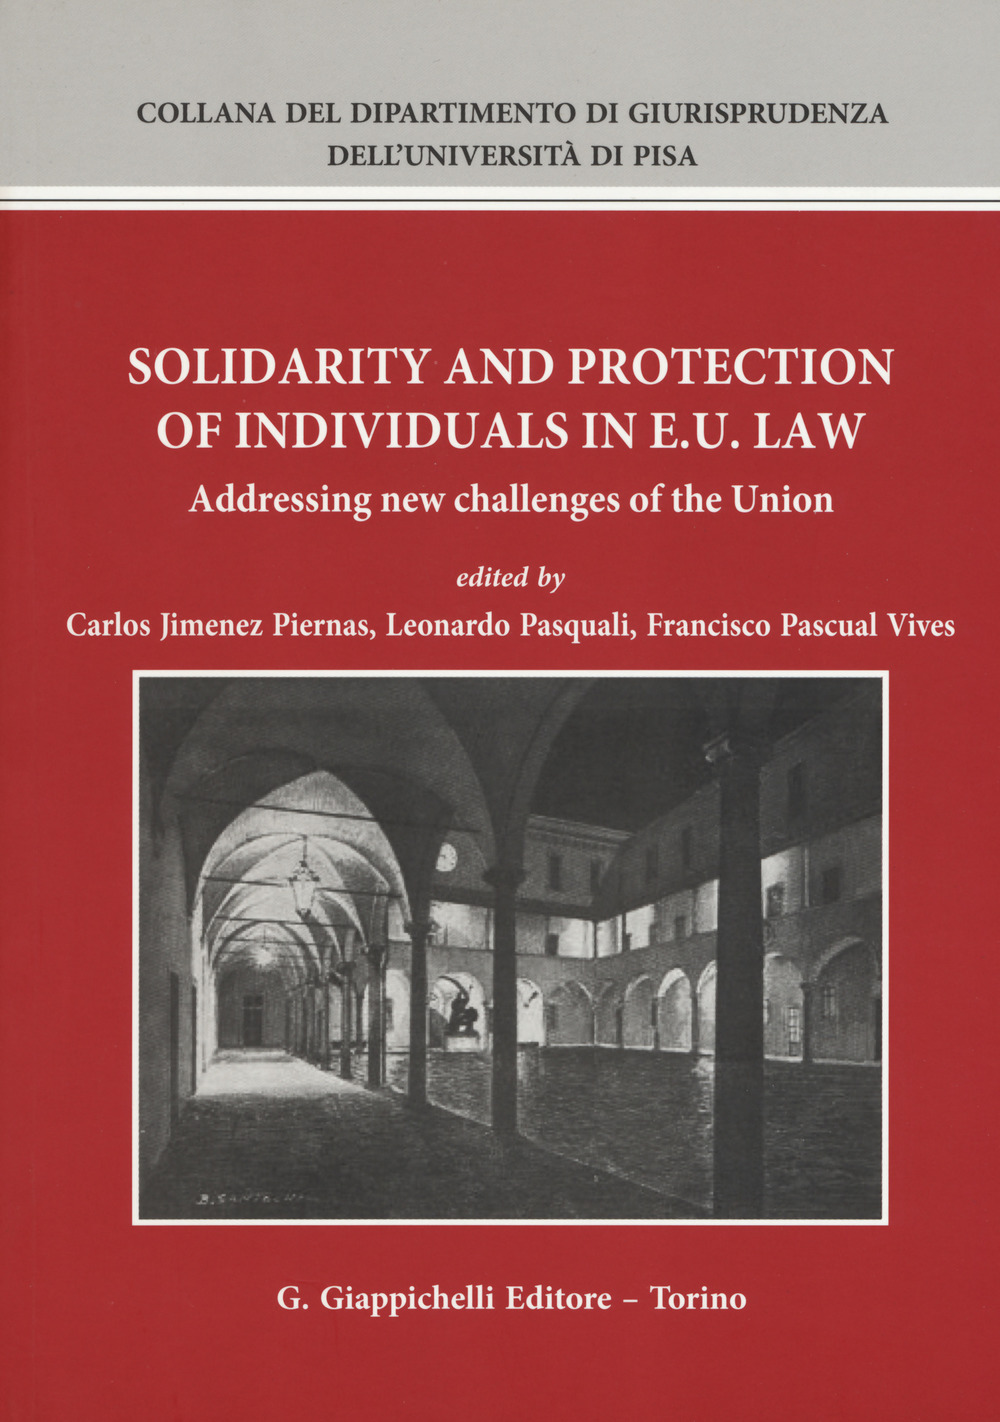 Solidarity and protection of individuals in E.U. Law. Addressing new challenges of the Union